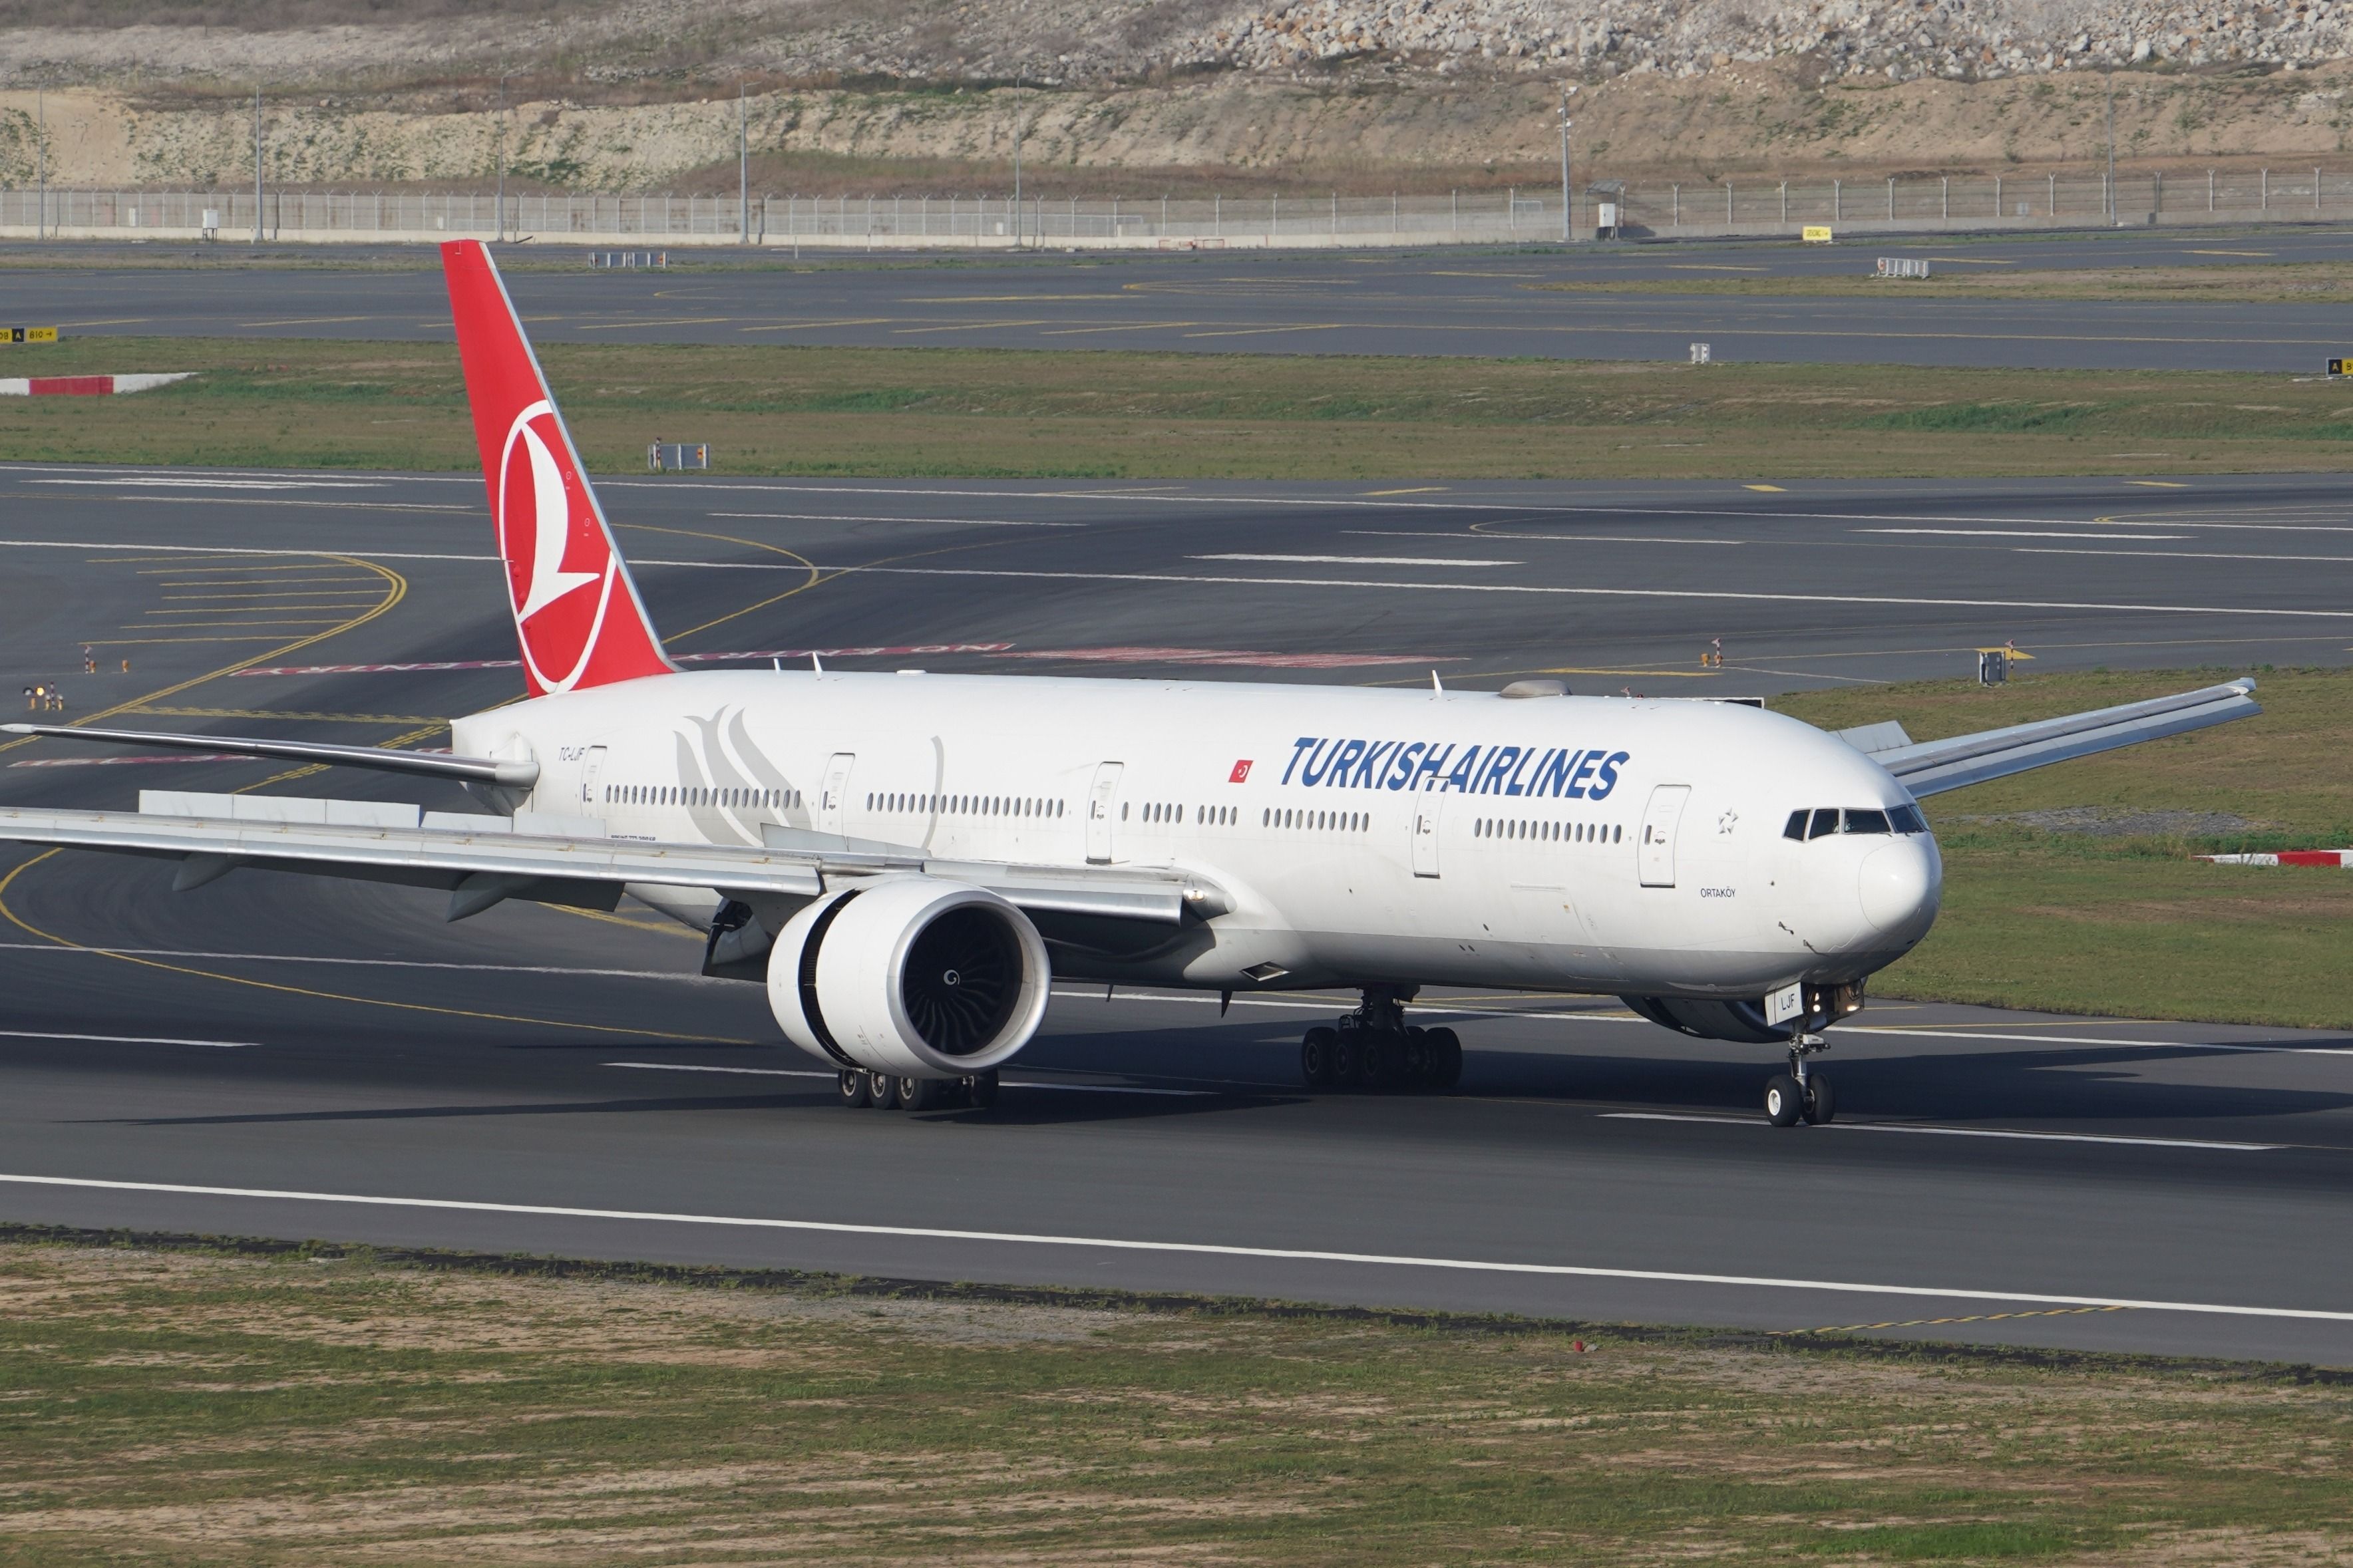 Turkish Airlines Boeing 777-3F2/ER lands at Istanbul International Airport.